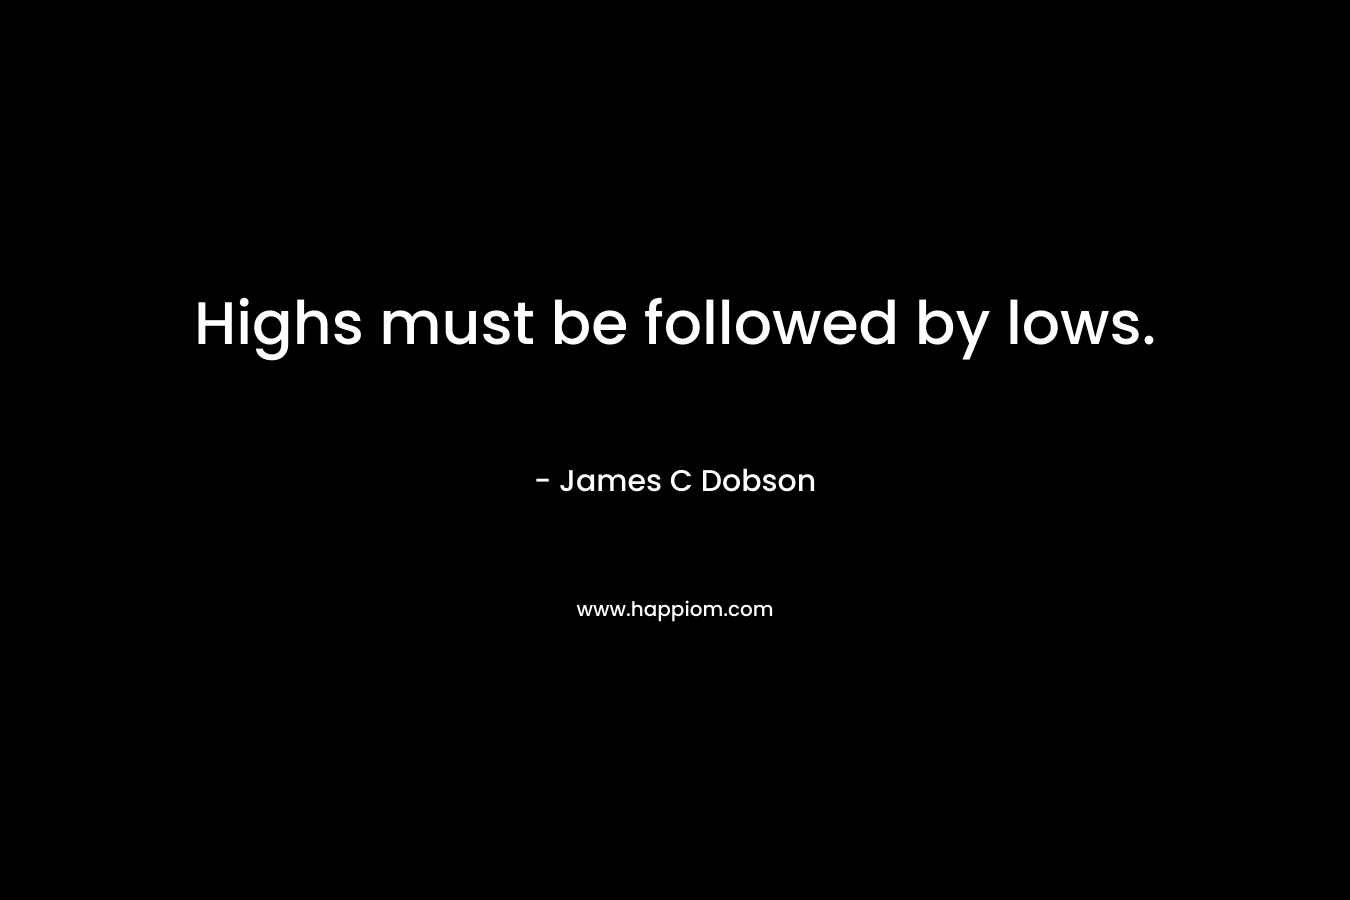 Highs must be followed by lows. – James C Dobson